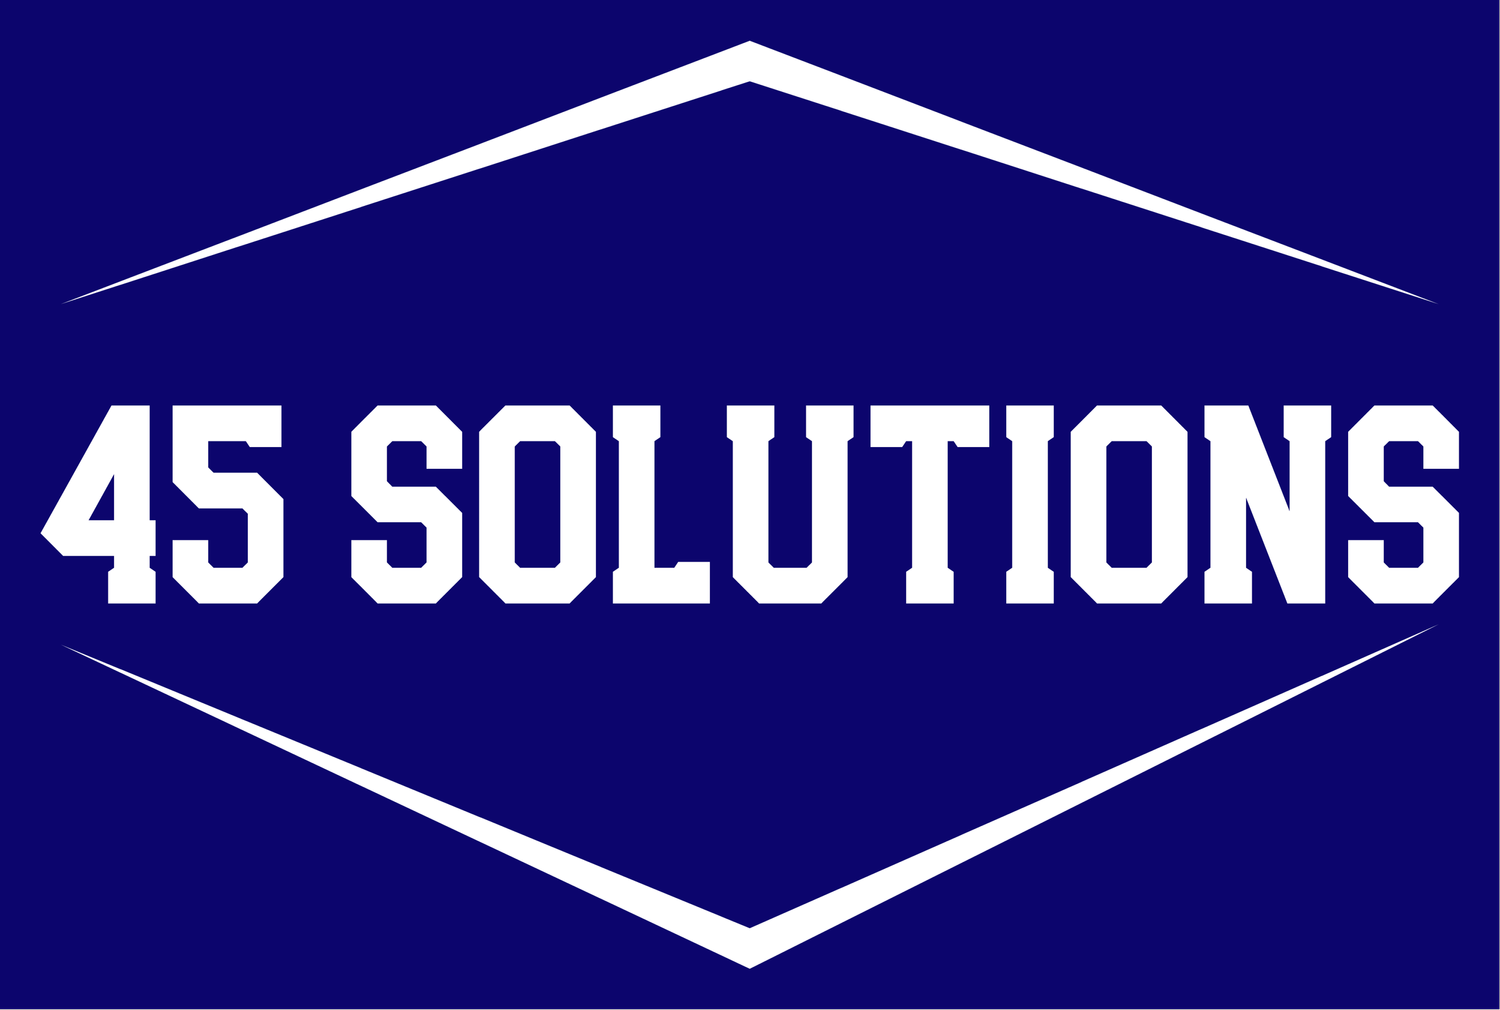 45 Solutions